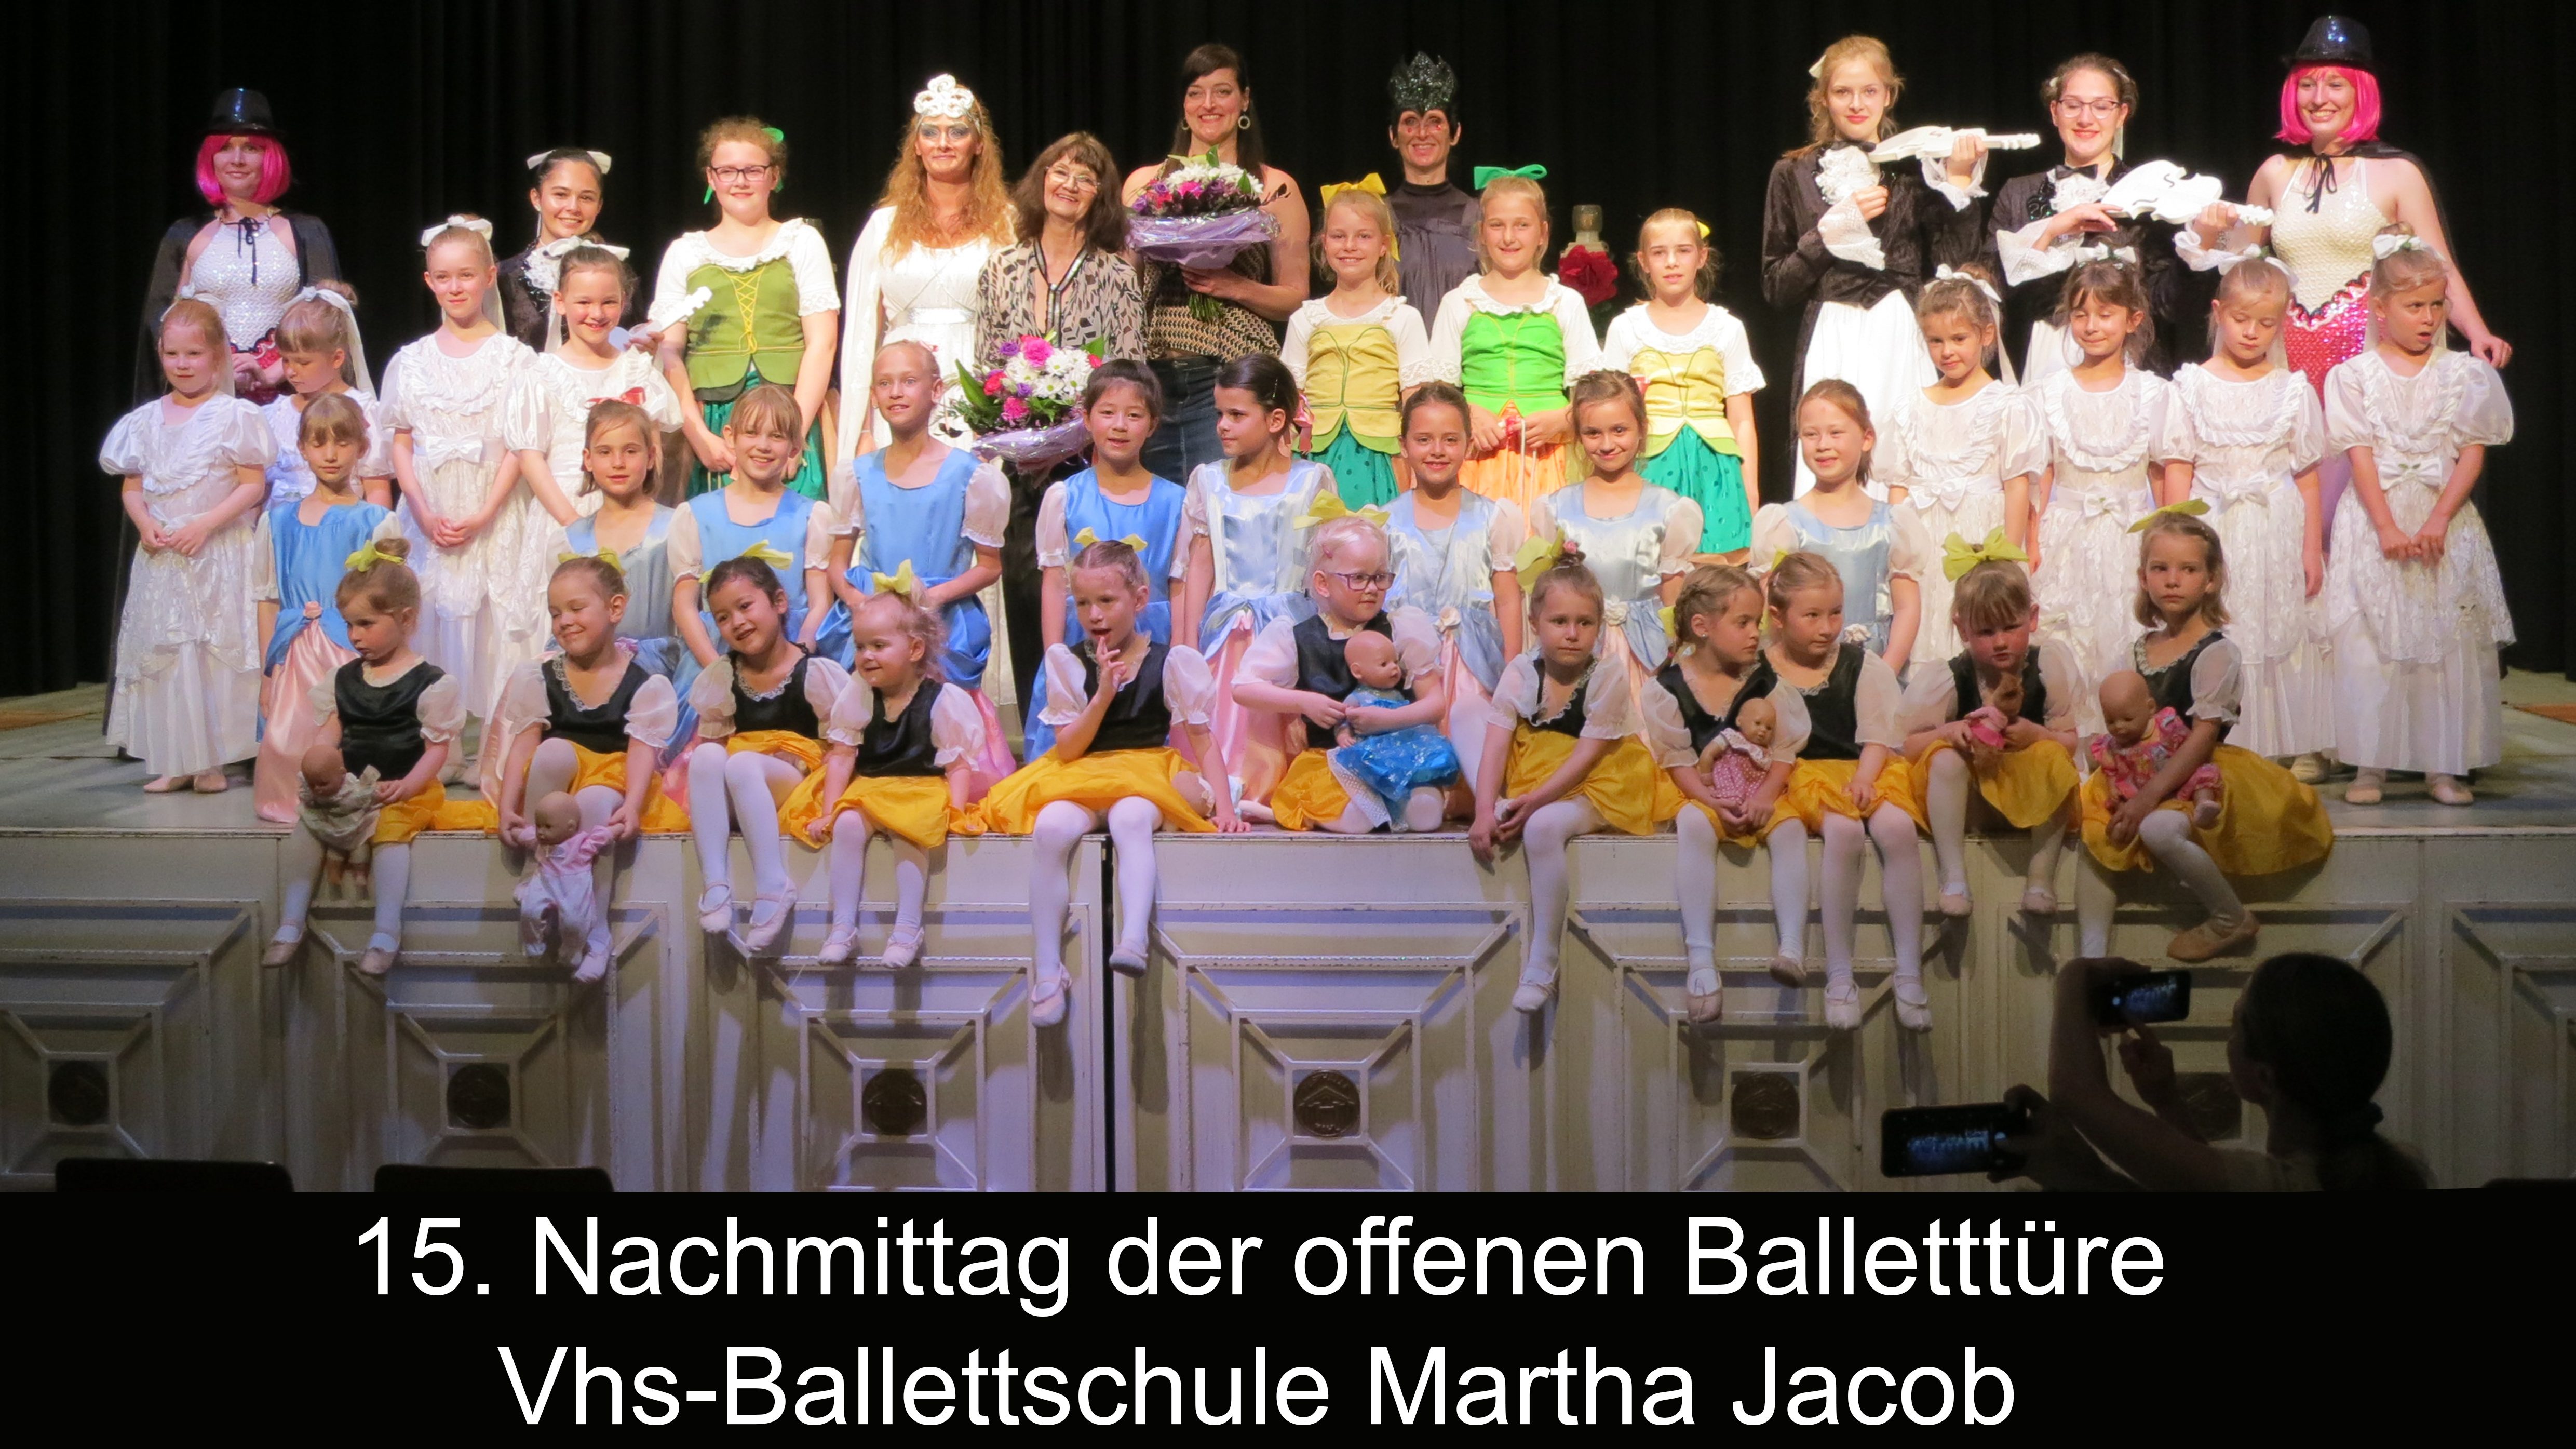 You are currently viewing Ballettnachmittag verlief sehr erfolgreich